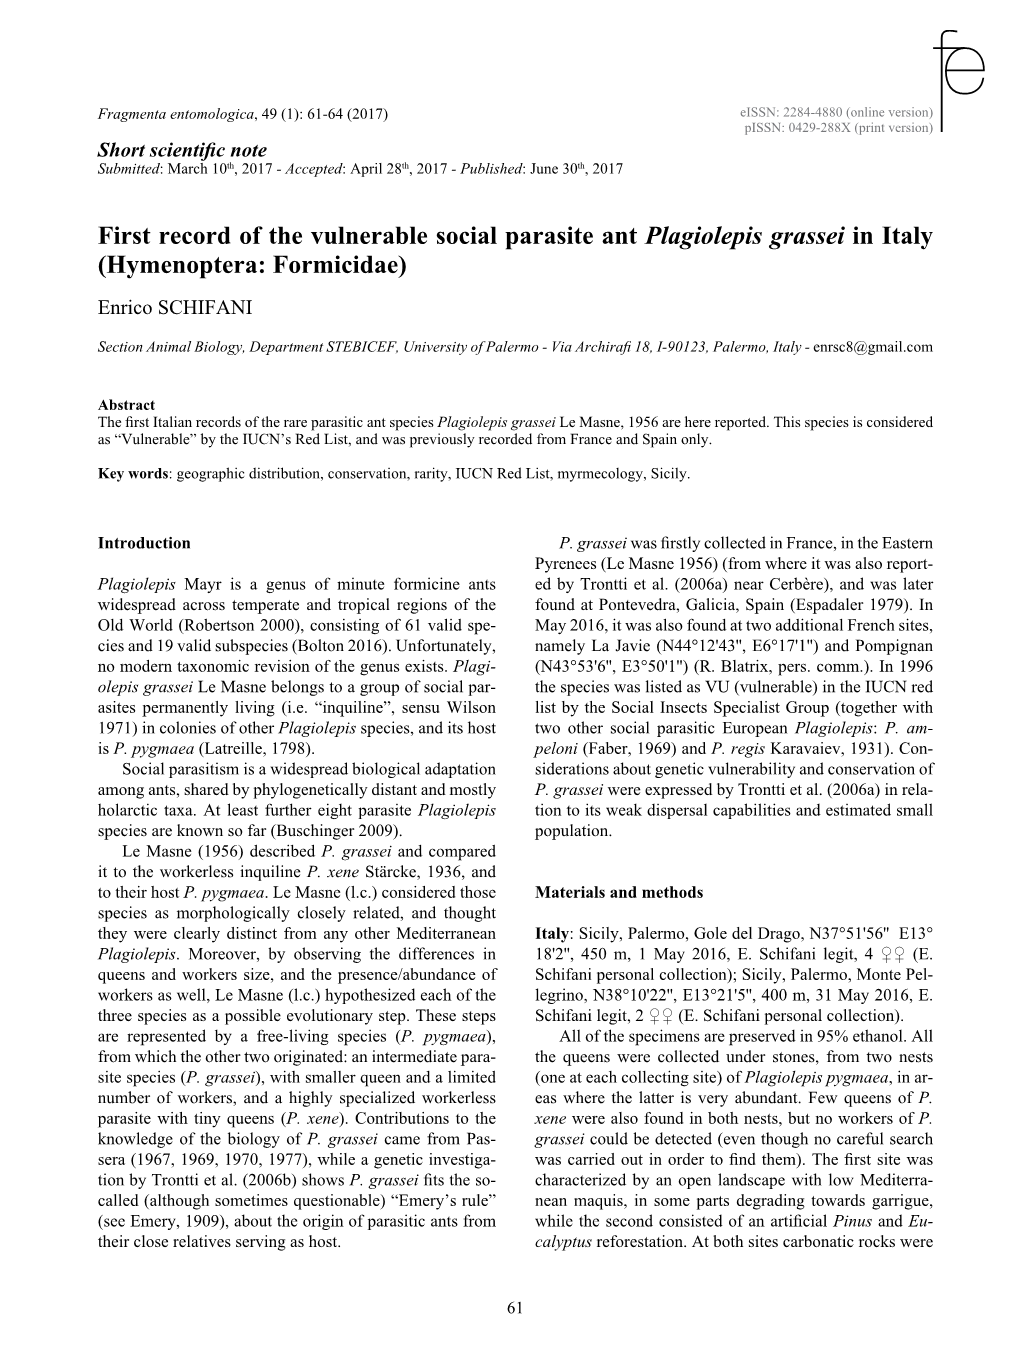 First Record of the Vulnerable Social Parasite Ant Plagiolepis Grassei in Italy (Hymenoptera: Formicidae) Enrico SCHIFANI